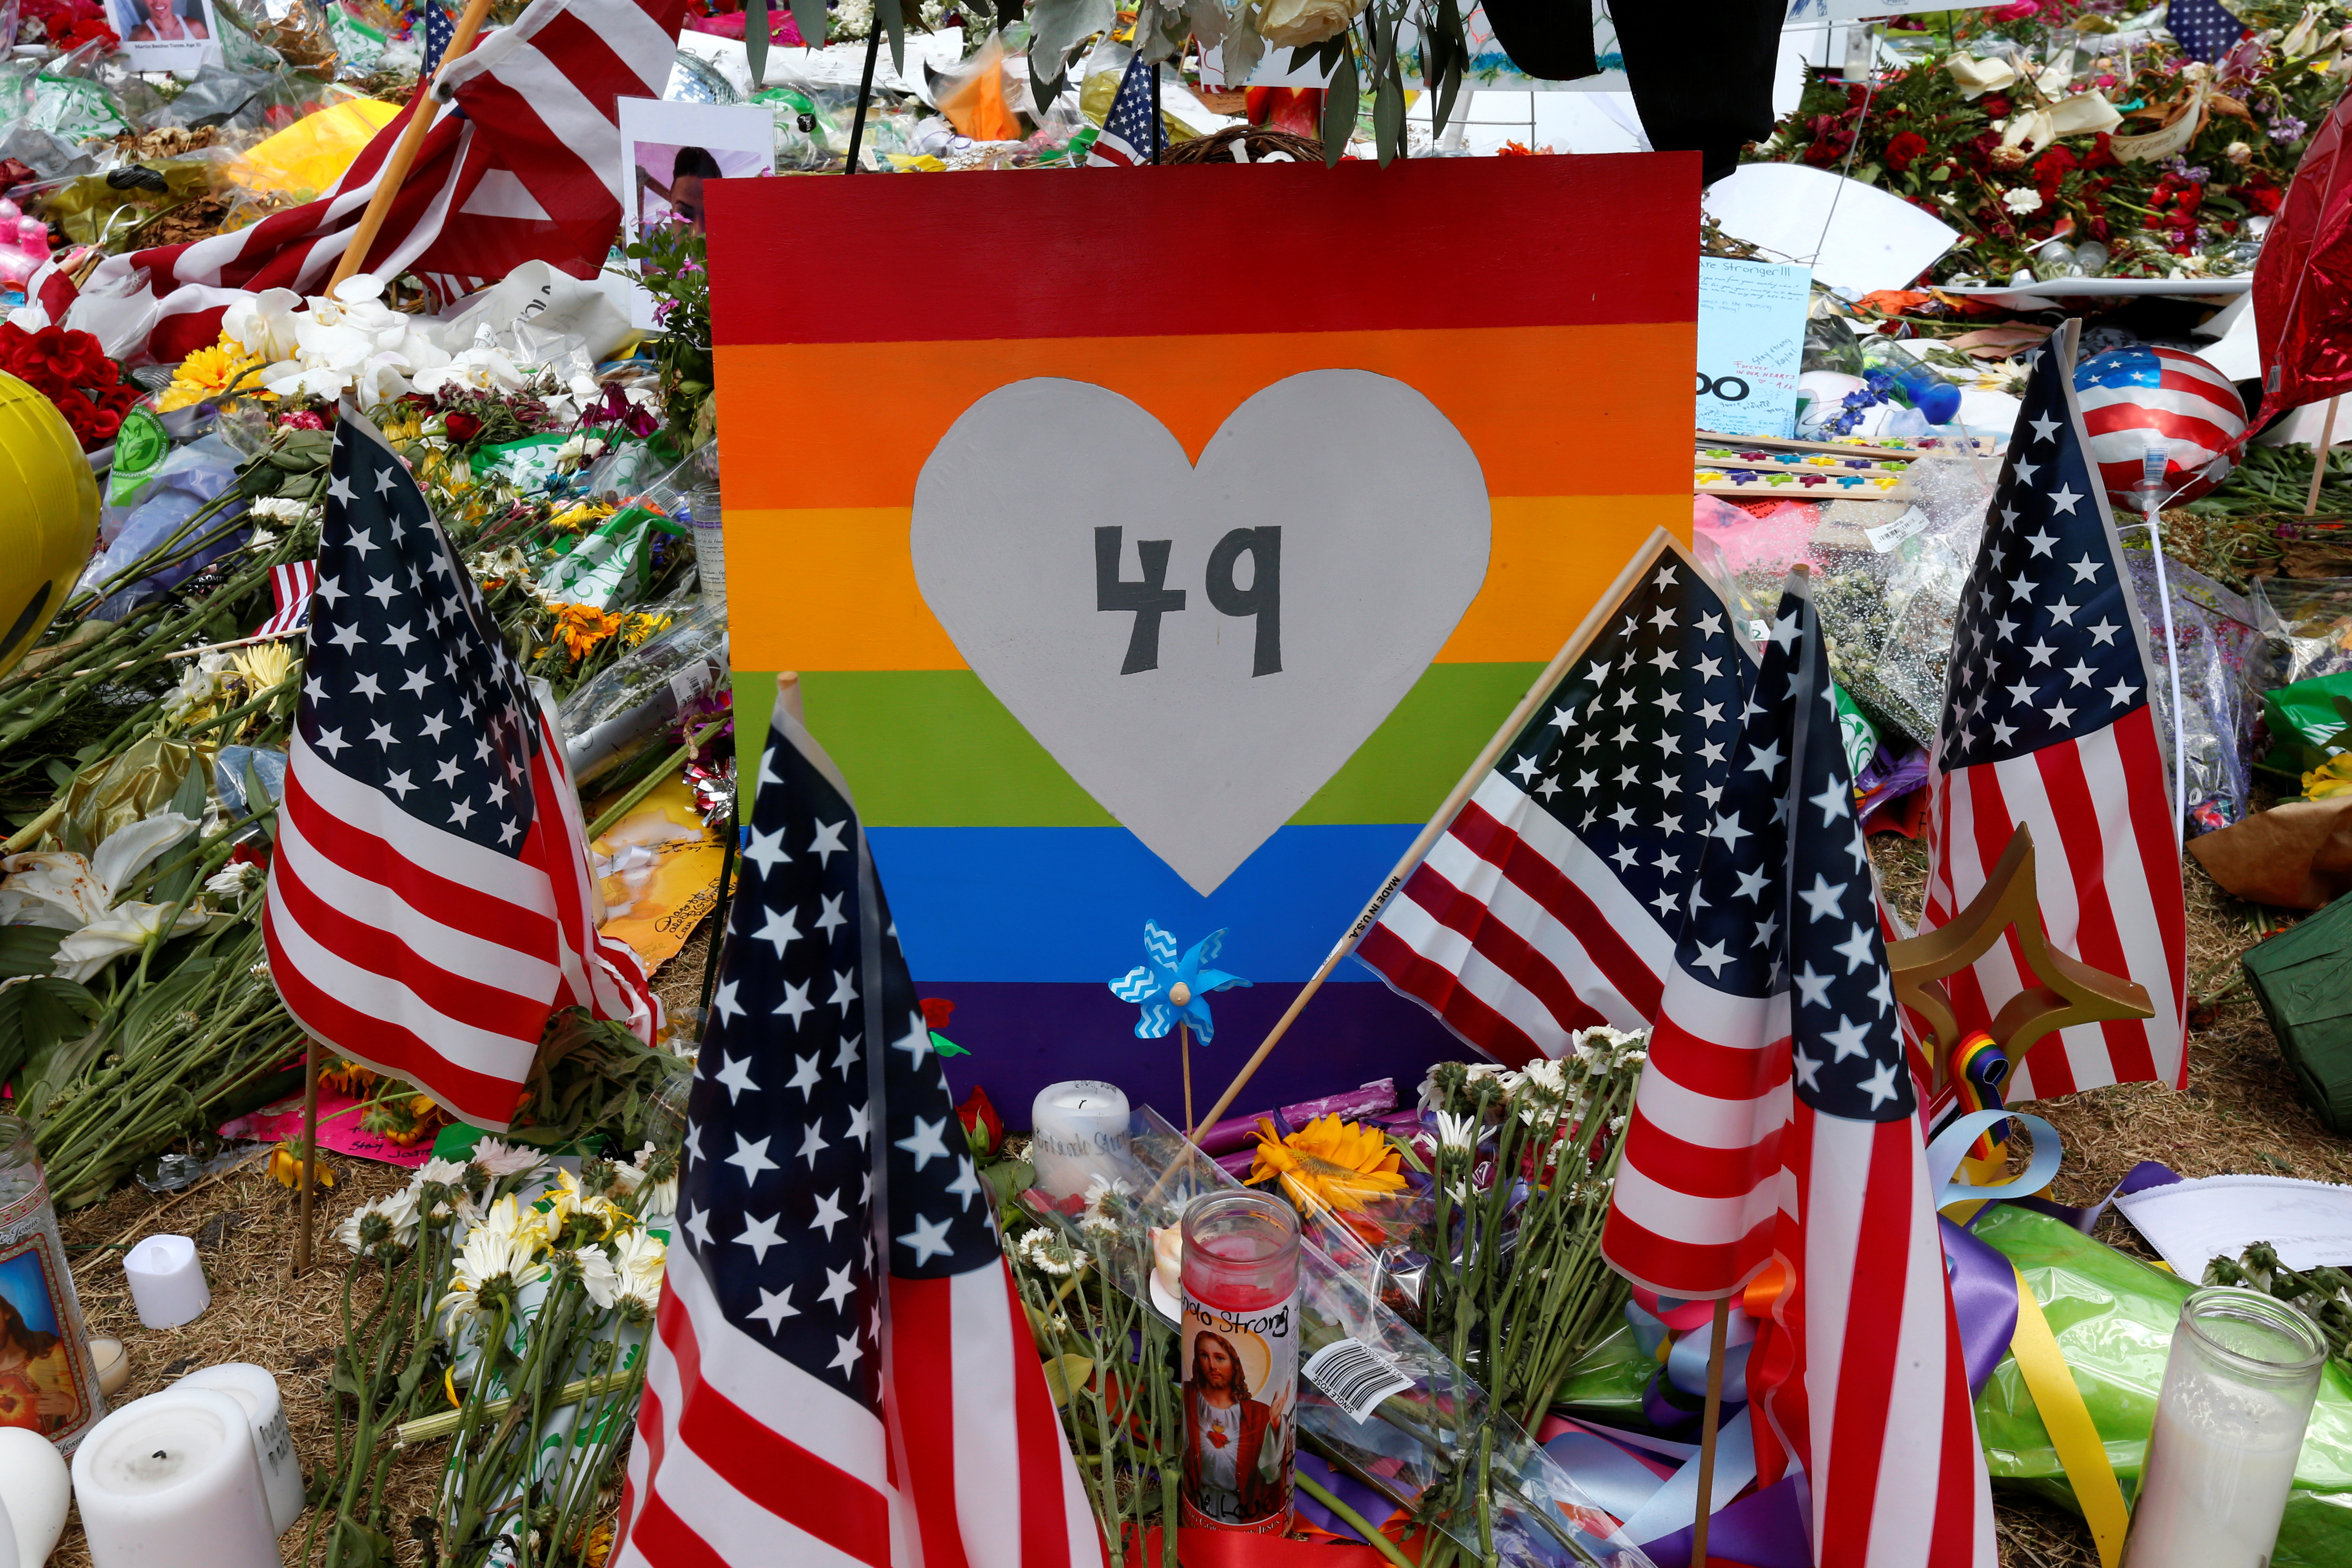 A sign with the number 49 on it is pictured as part of a makeshift memorial following the Pulse night club shootings in Orlando, Florida, U.S., June 20, 2016. REUTERS/Carlo Allegri